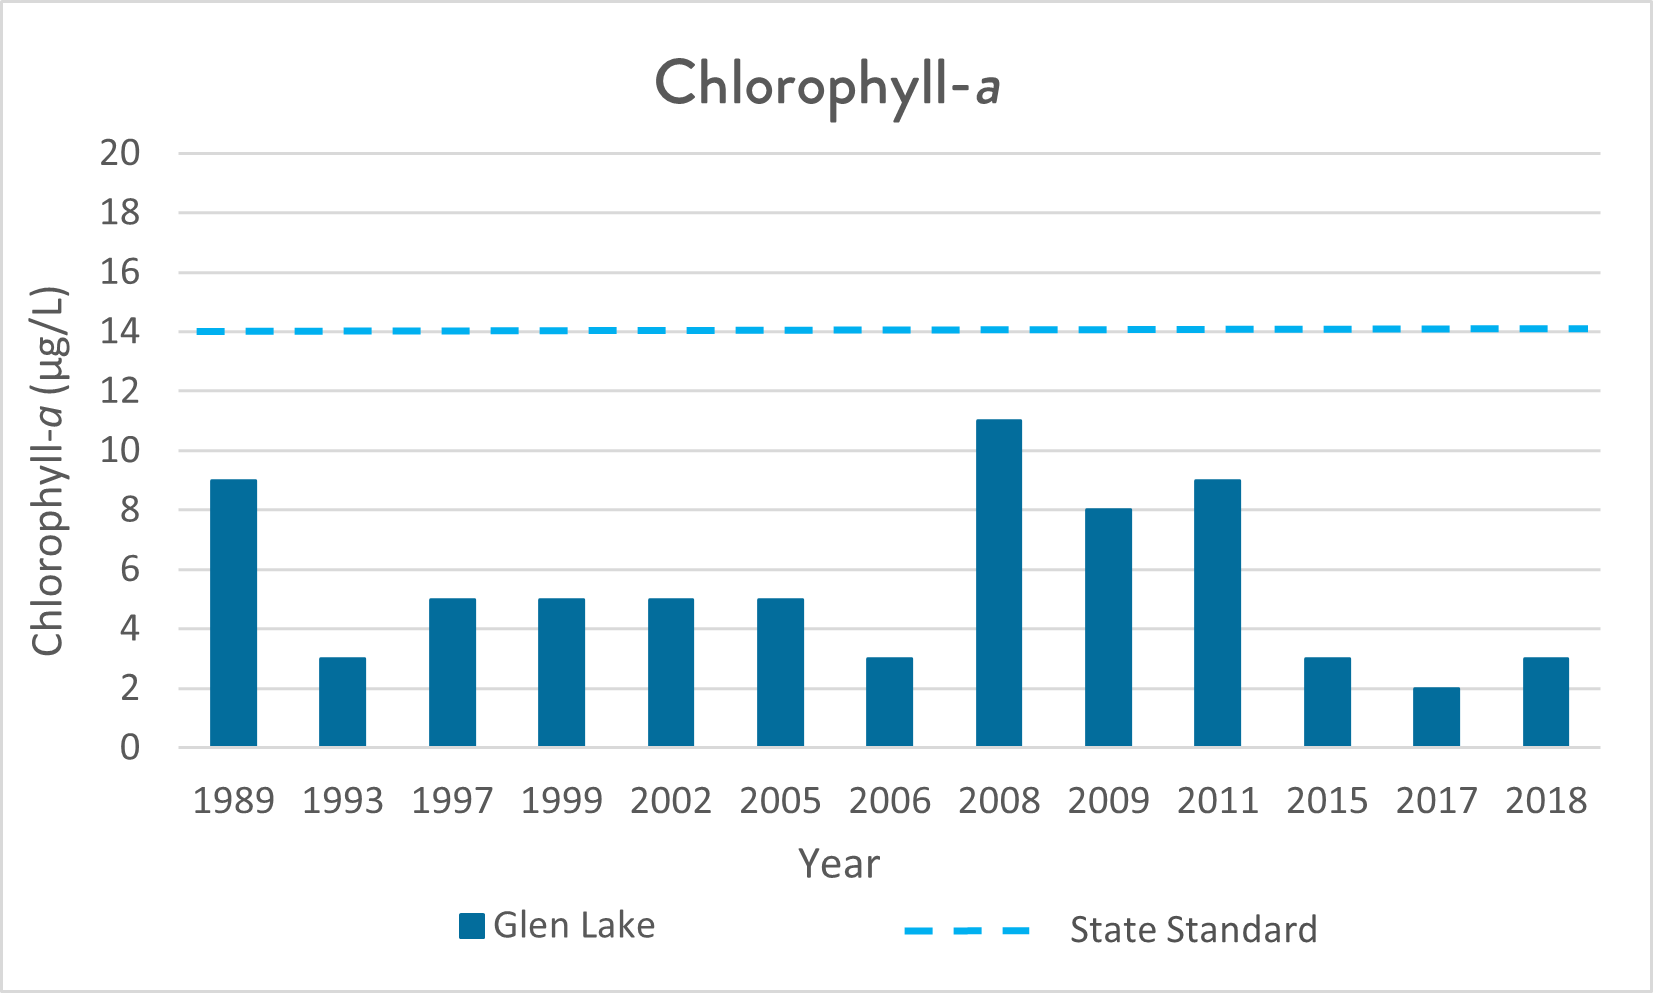 chlorophyll-a levels in Glen Lake are consistently better than the state standard since measurements started to be collected in 1989